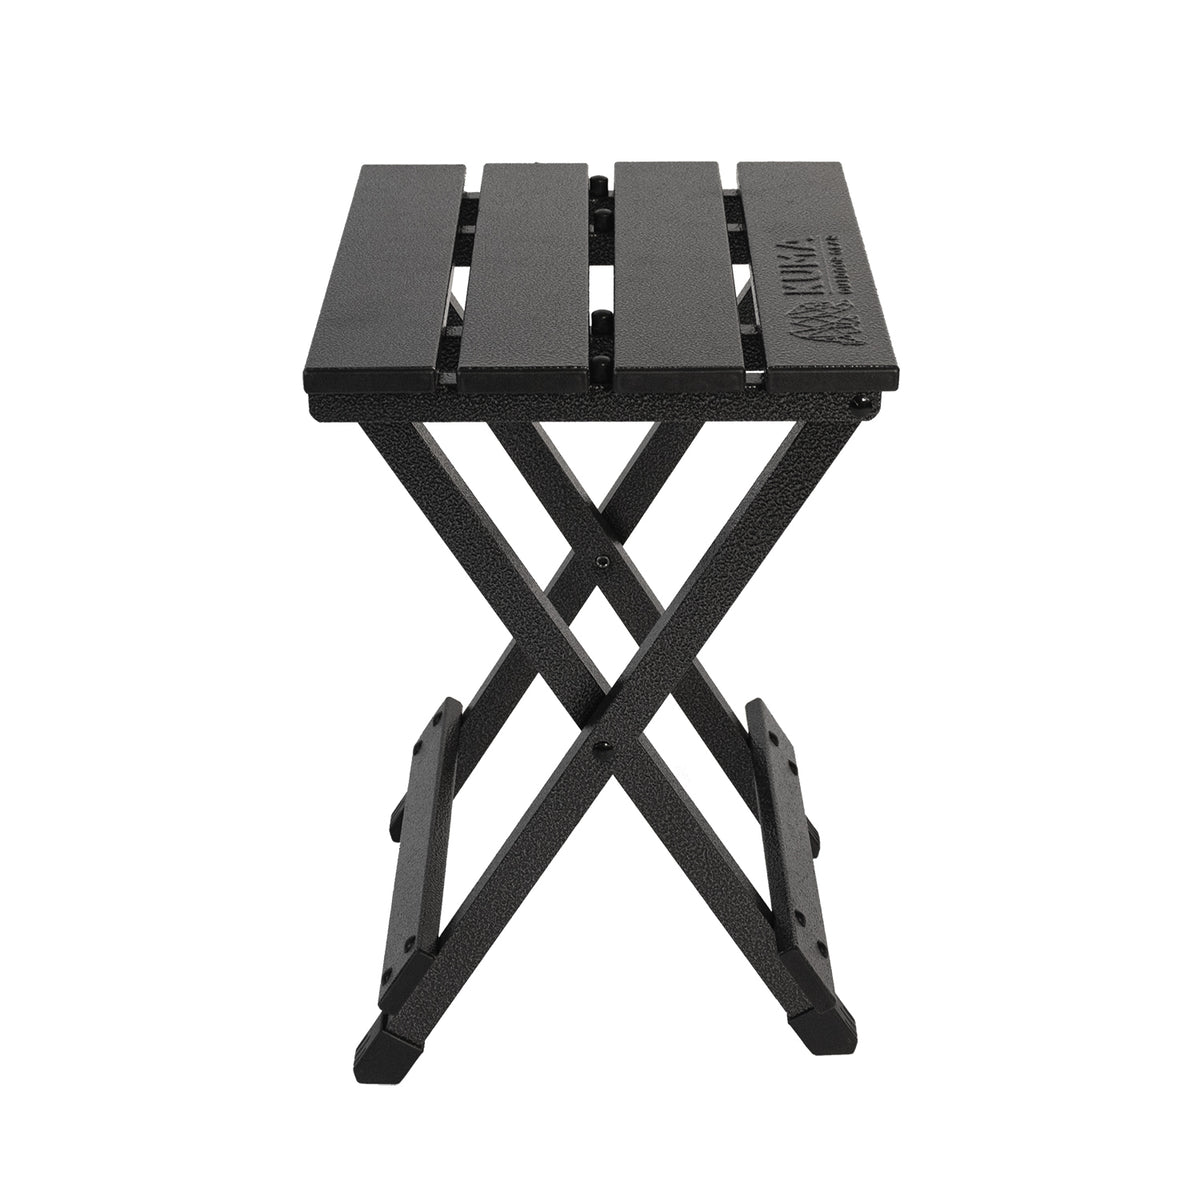 Portable camping Stool/Table